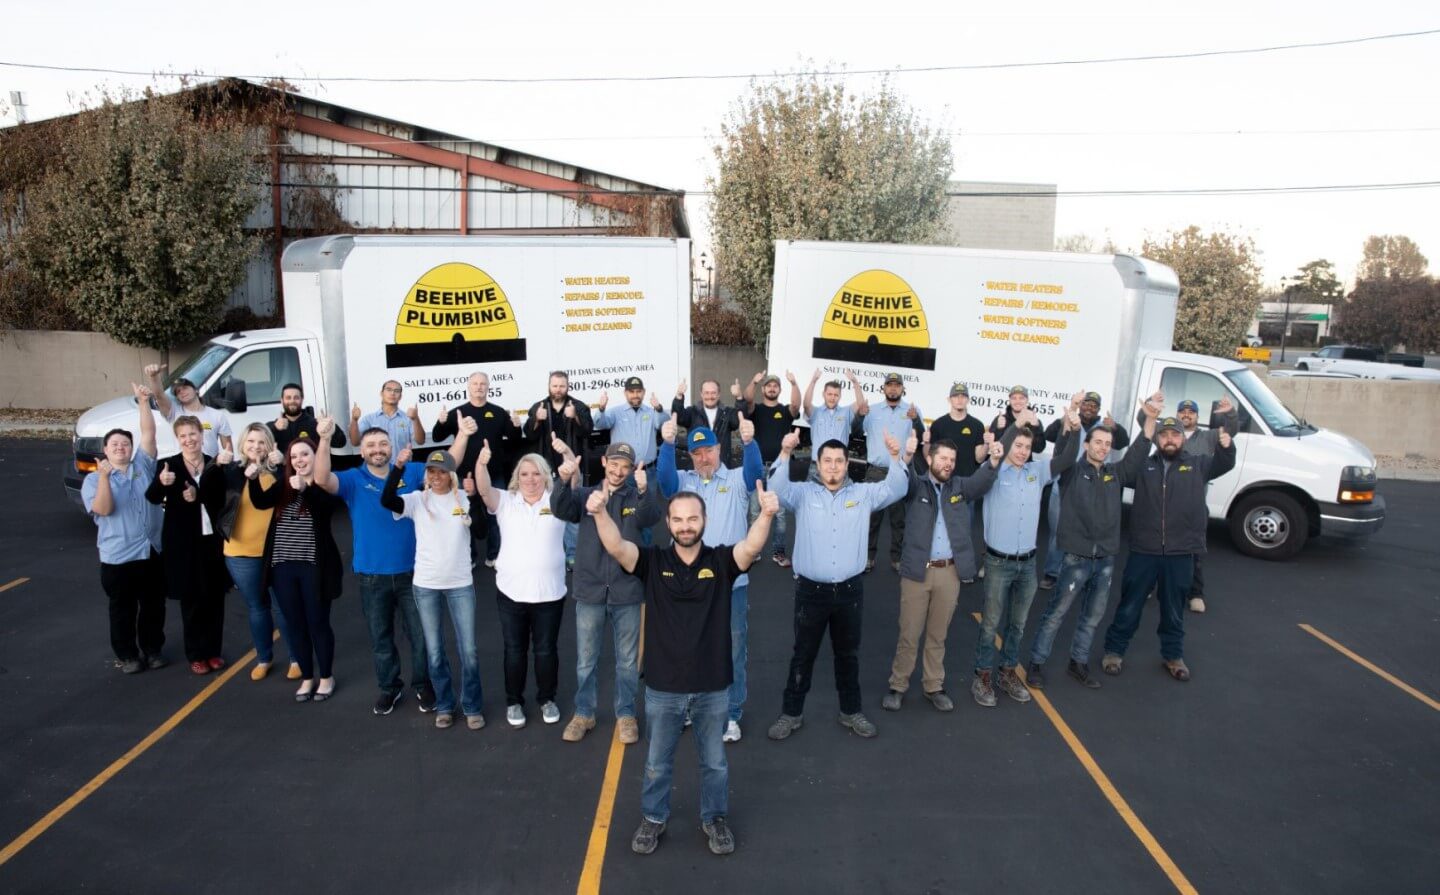 Beehive Plumbing is a plumbing company in Northern Utah with a team of Master Plumbers